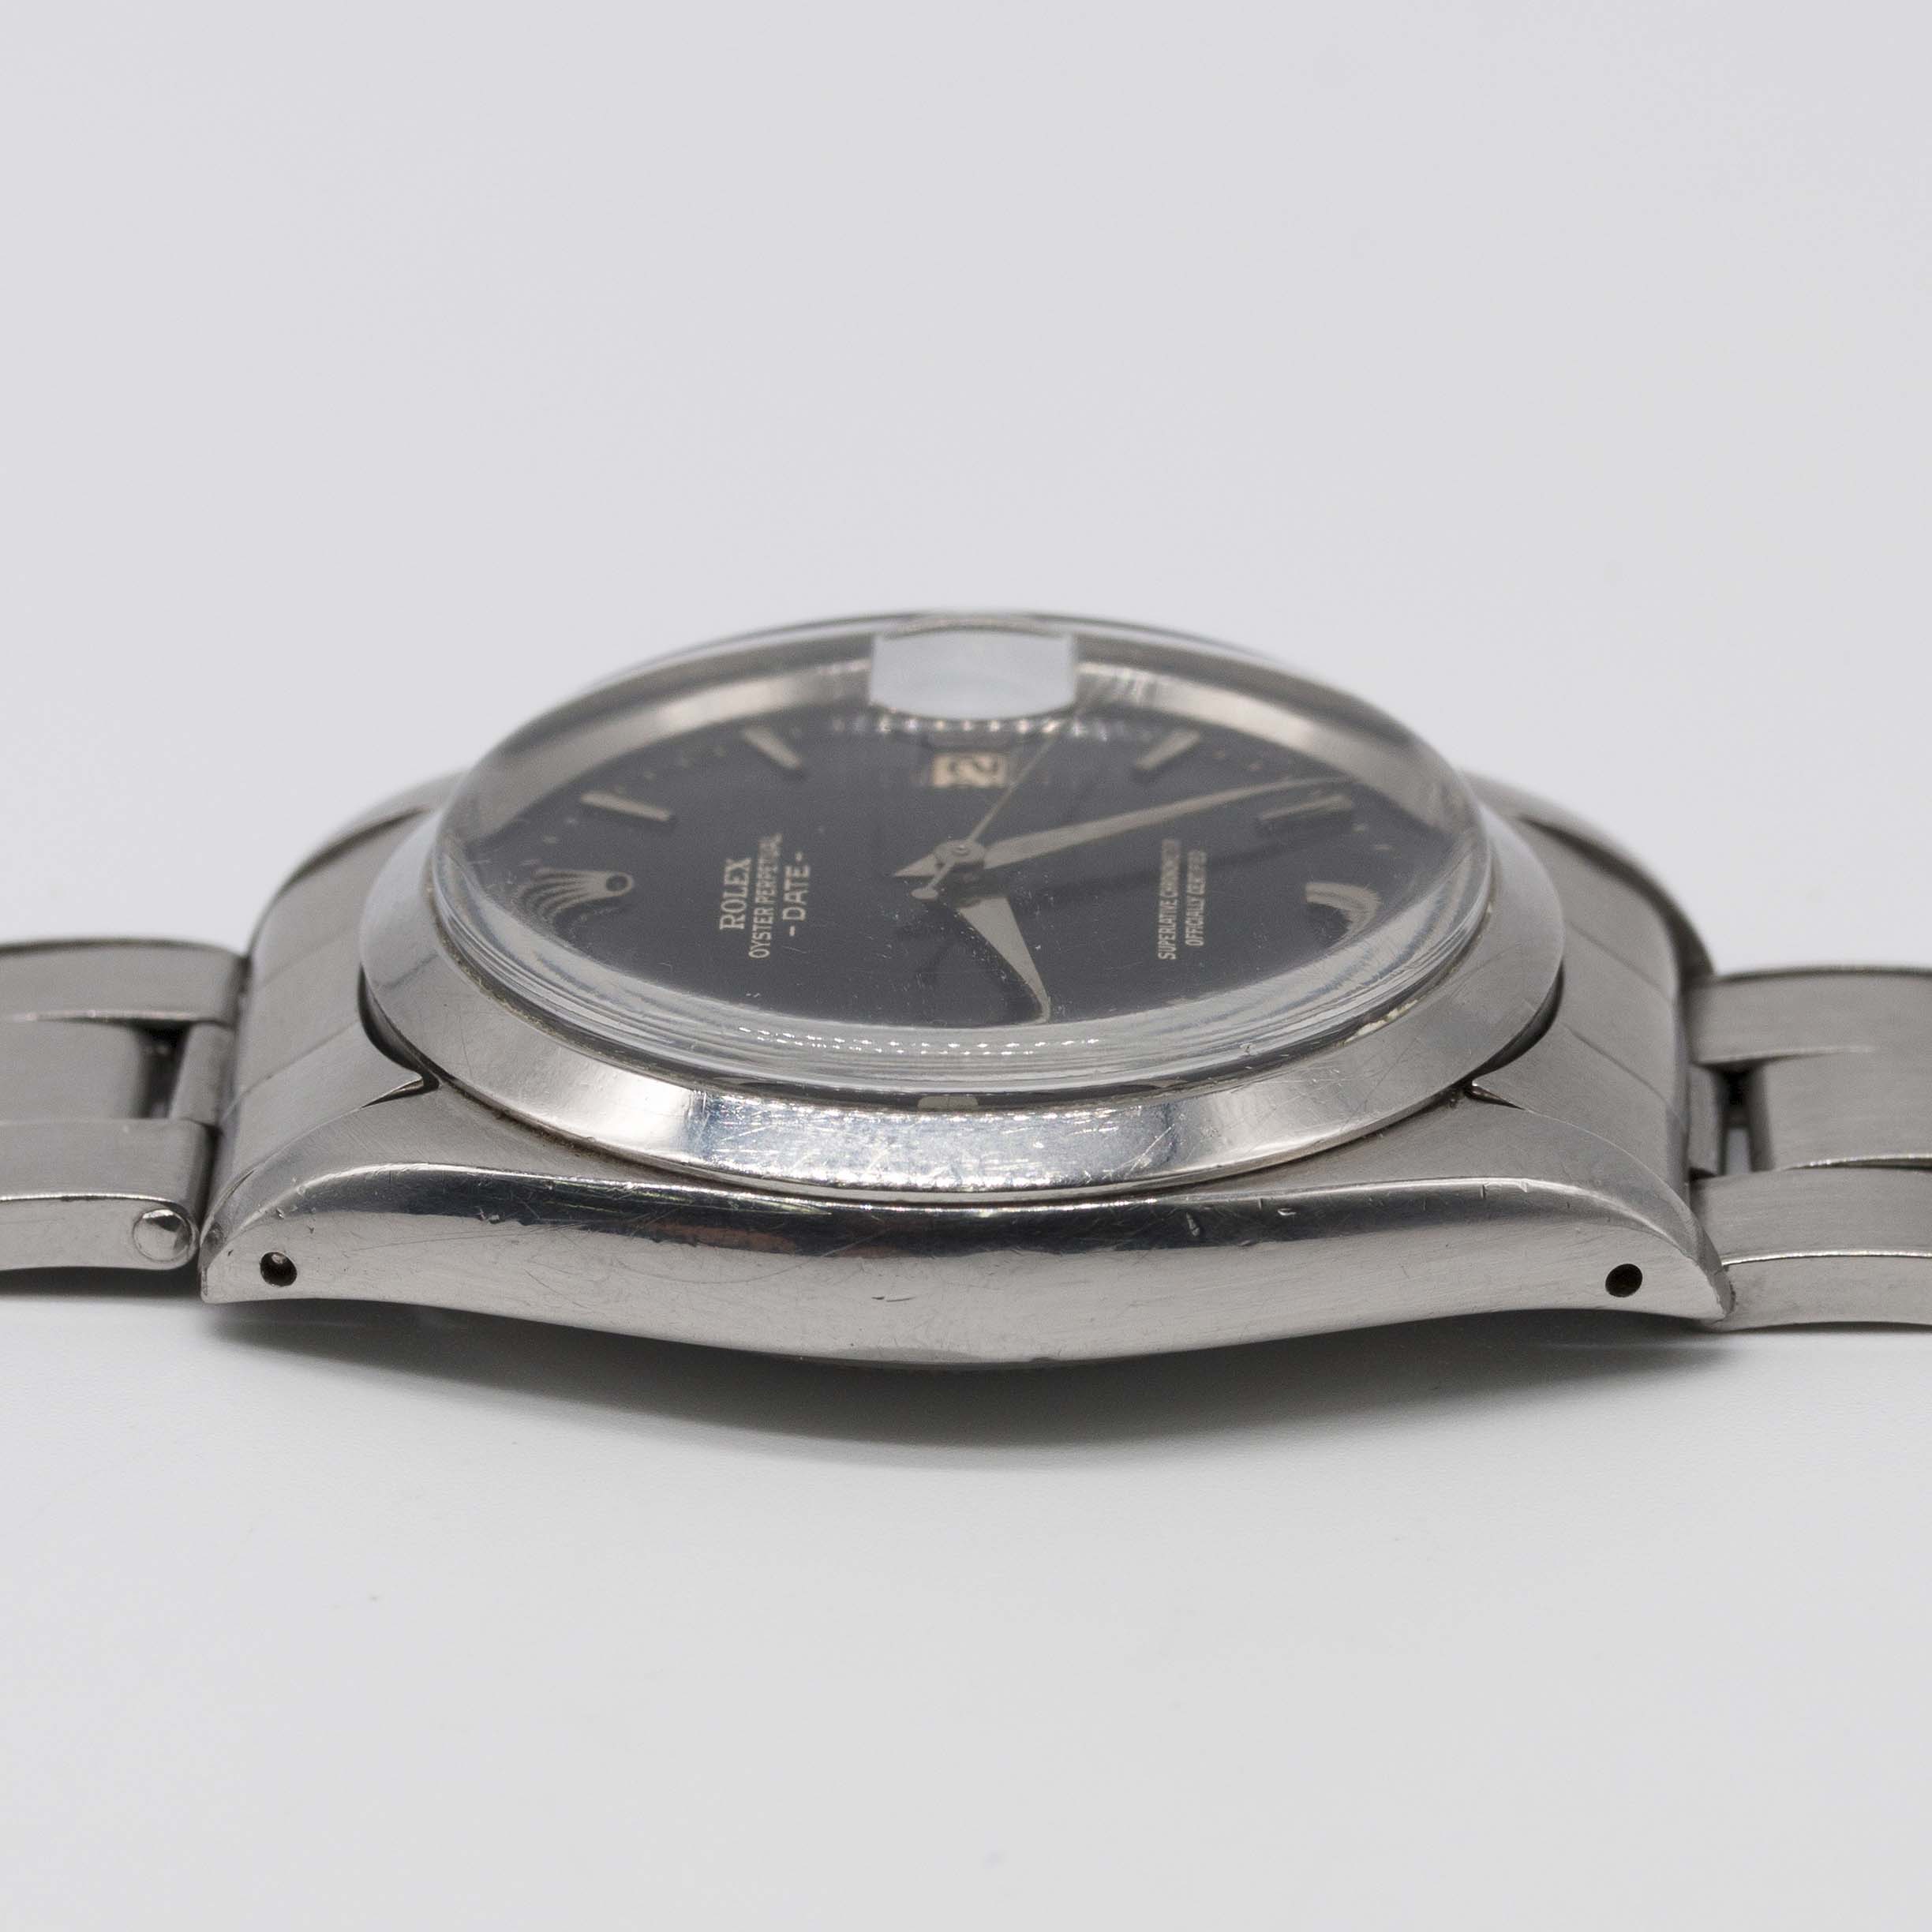 A GENTLEMAN'S STAINLESS STEEL ROLEX OYSTER PERPETUAL DATE BRACELET WATCH CIRCA 1961, REF. 1500 GLOSS - Image 11 of 12